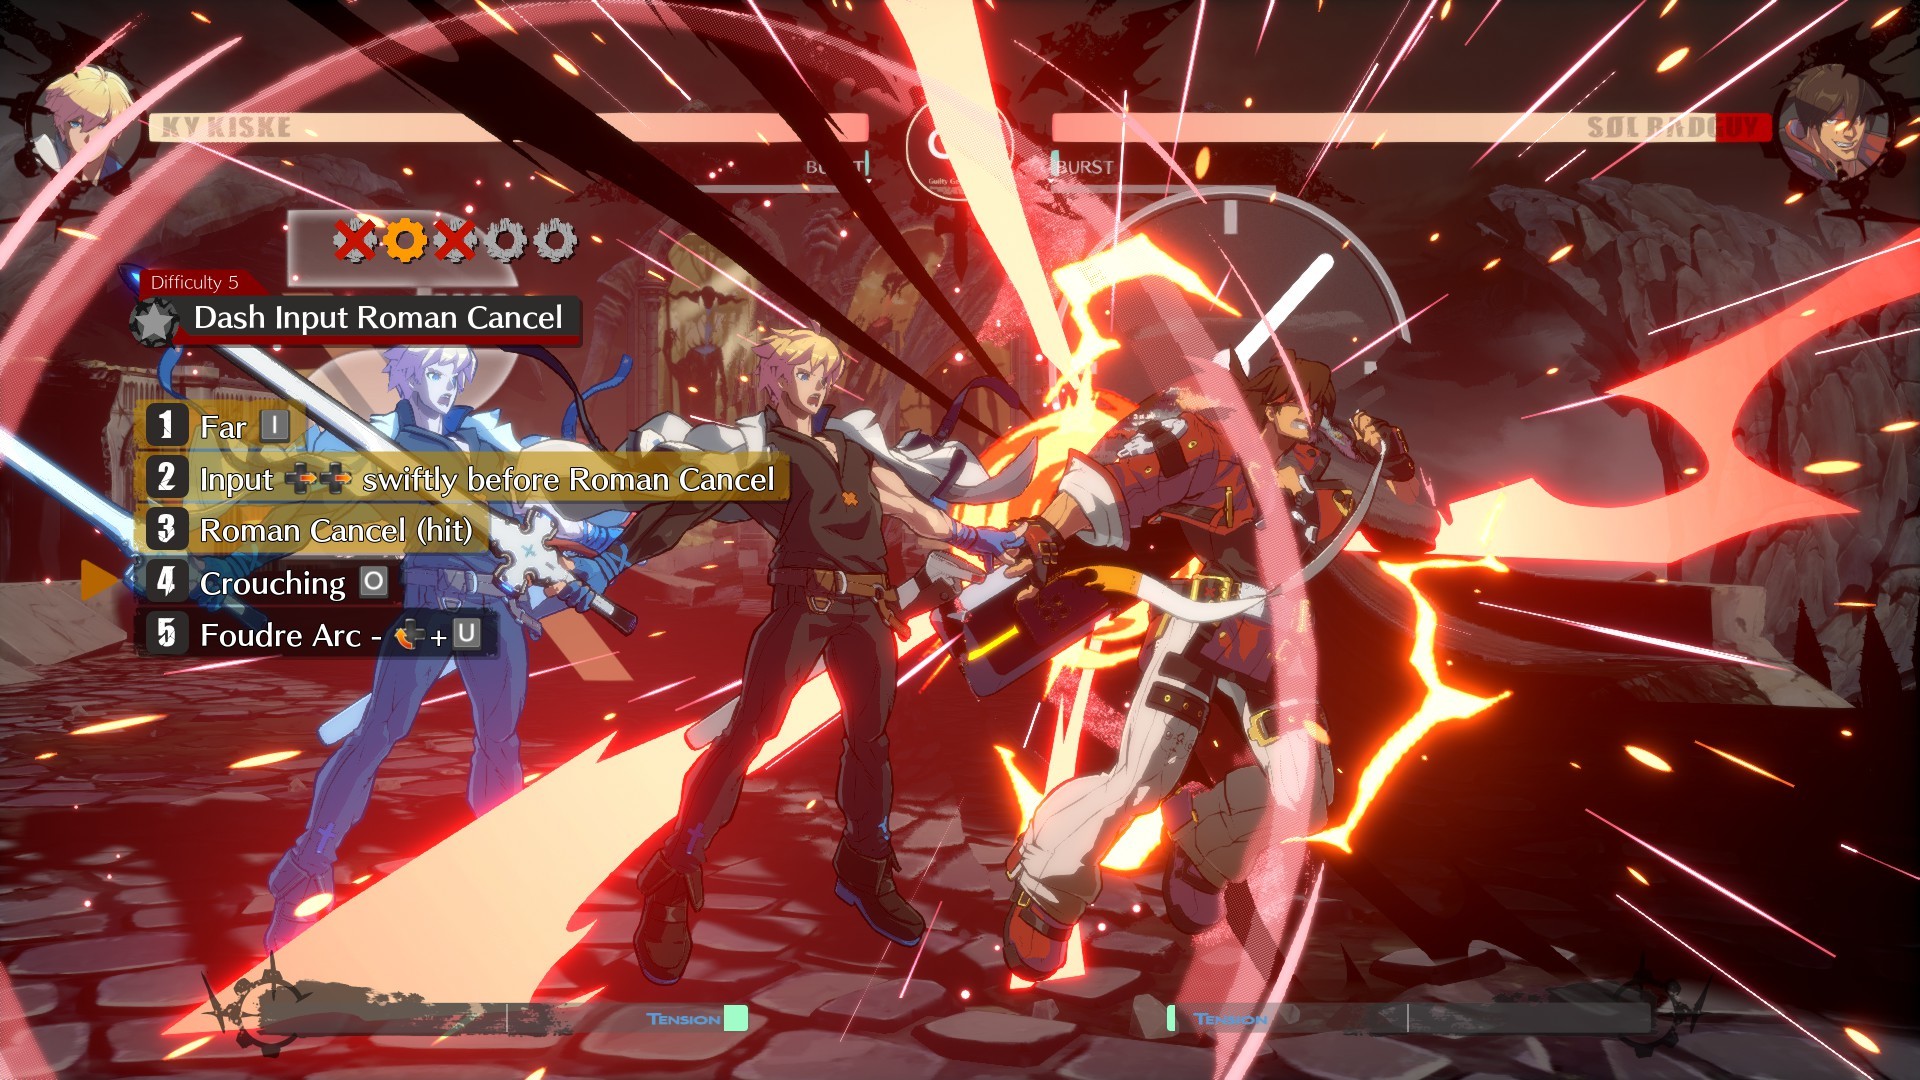 Guilty Gear: Strive takes over Steam chart, debuting both in 1st